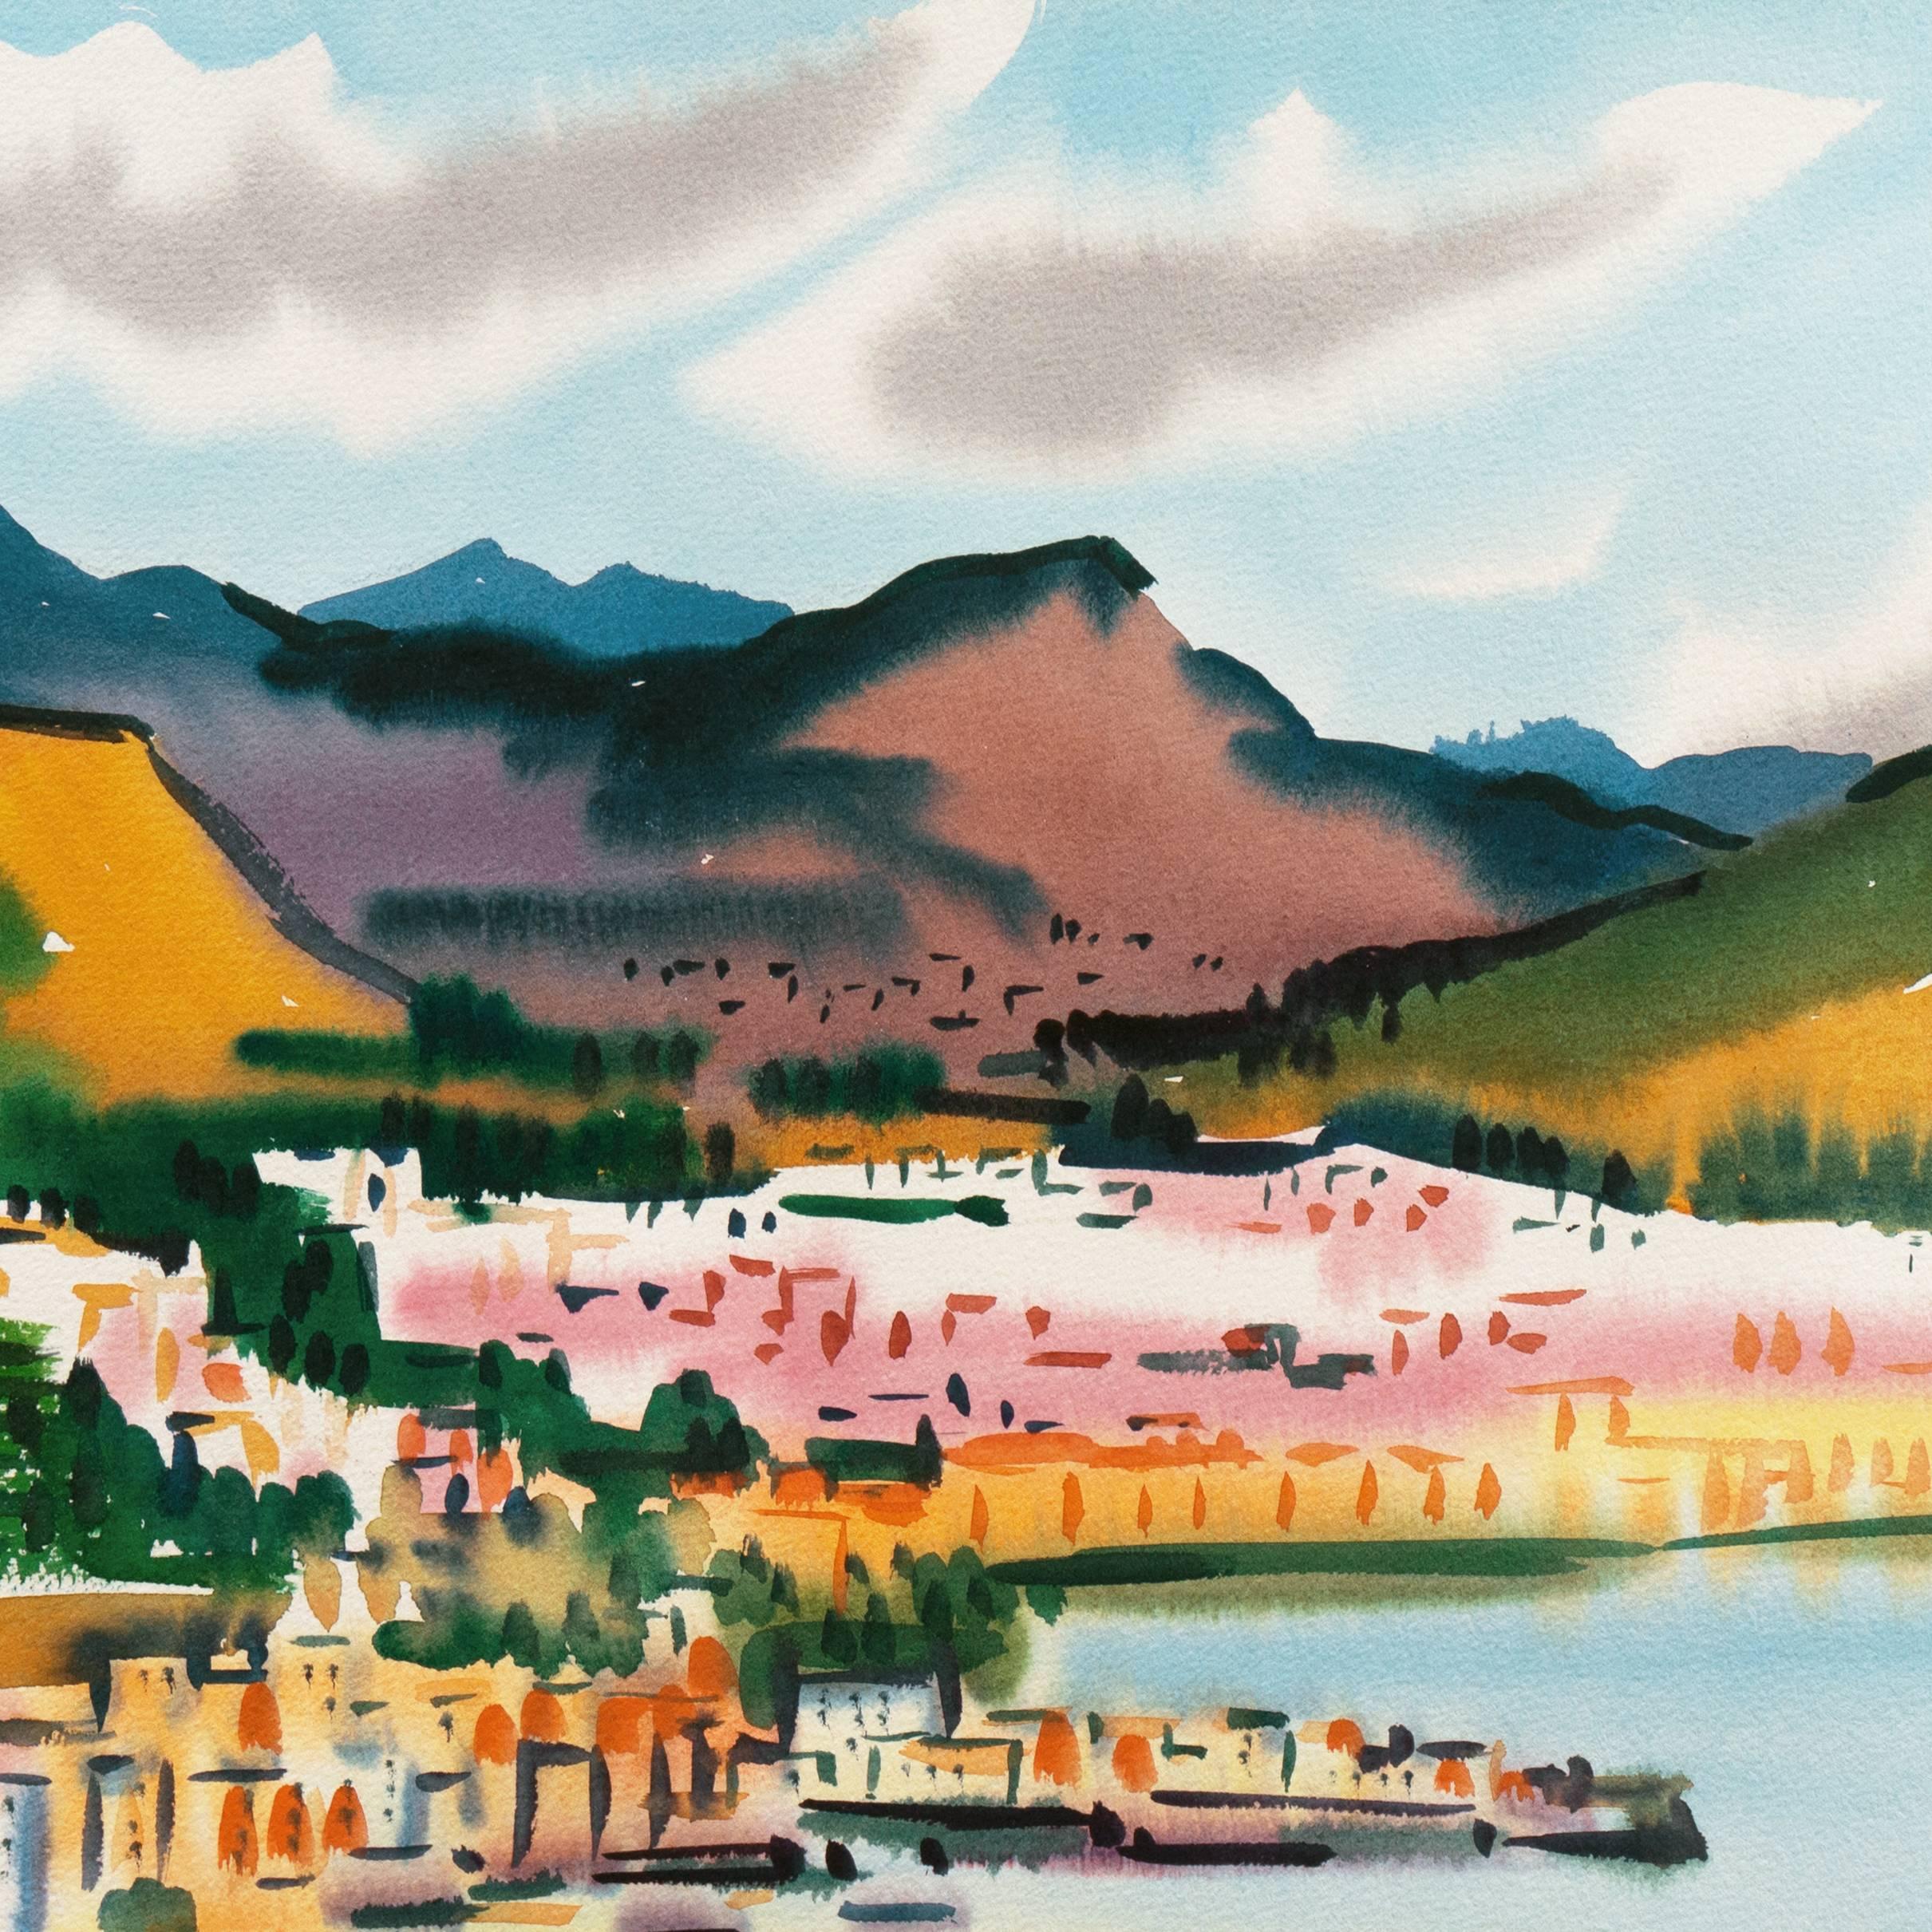 A vibrant coastal landscape showing a view of a jetty extending into the cove of a beachside town with a view to mountains beyond. 

Signed lower right, 'Nadine Pizzo' and painted circa 1960.

Born in San Francisco, Nadine Pizzo was educated at UC